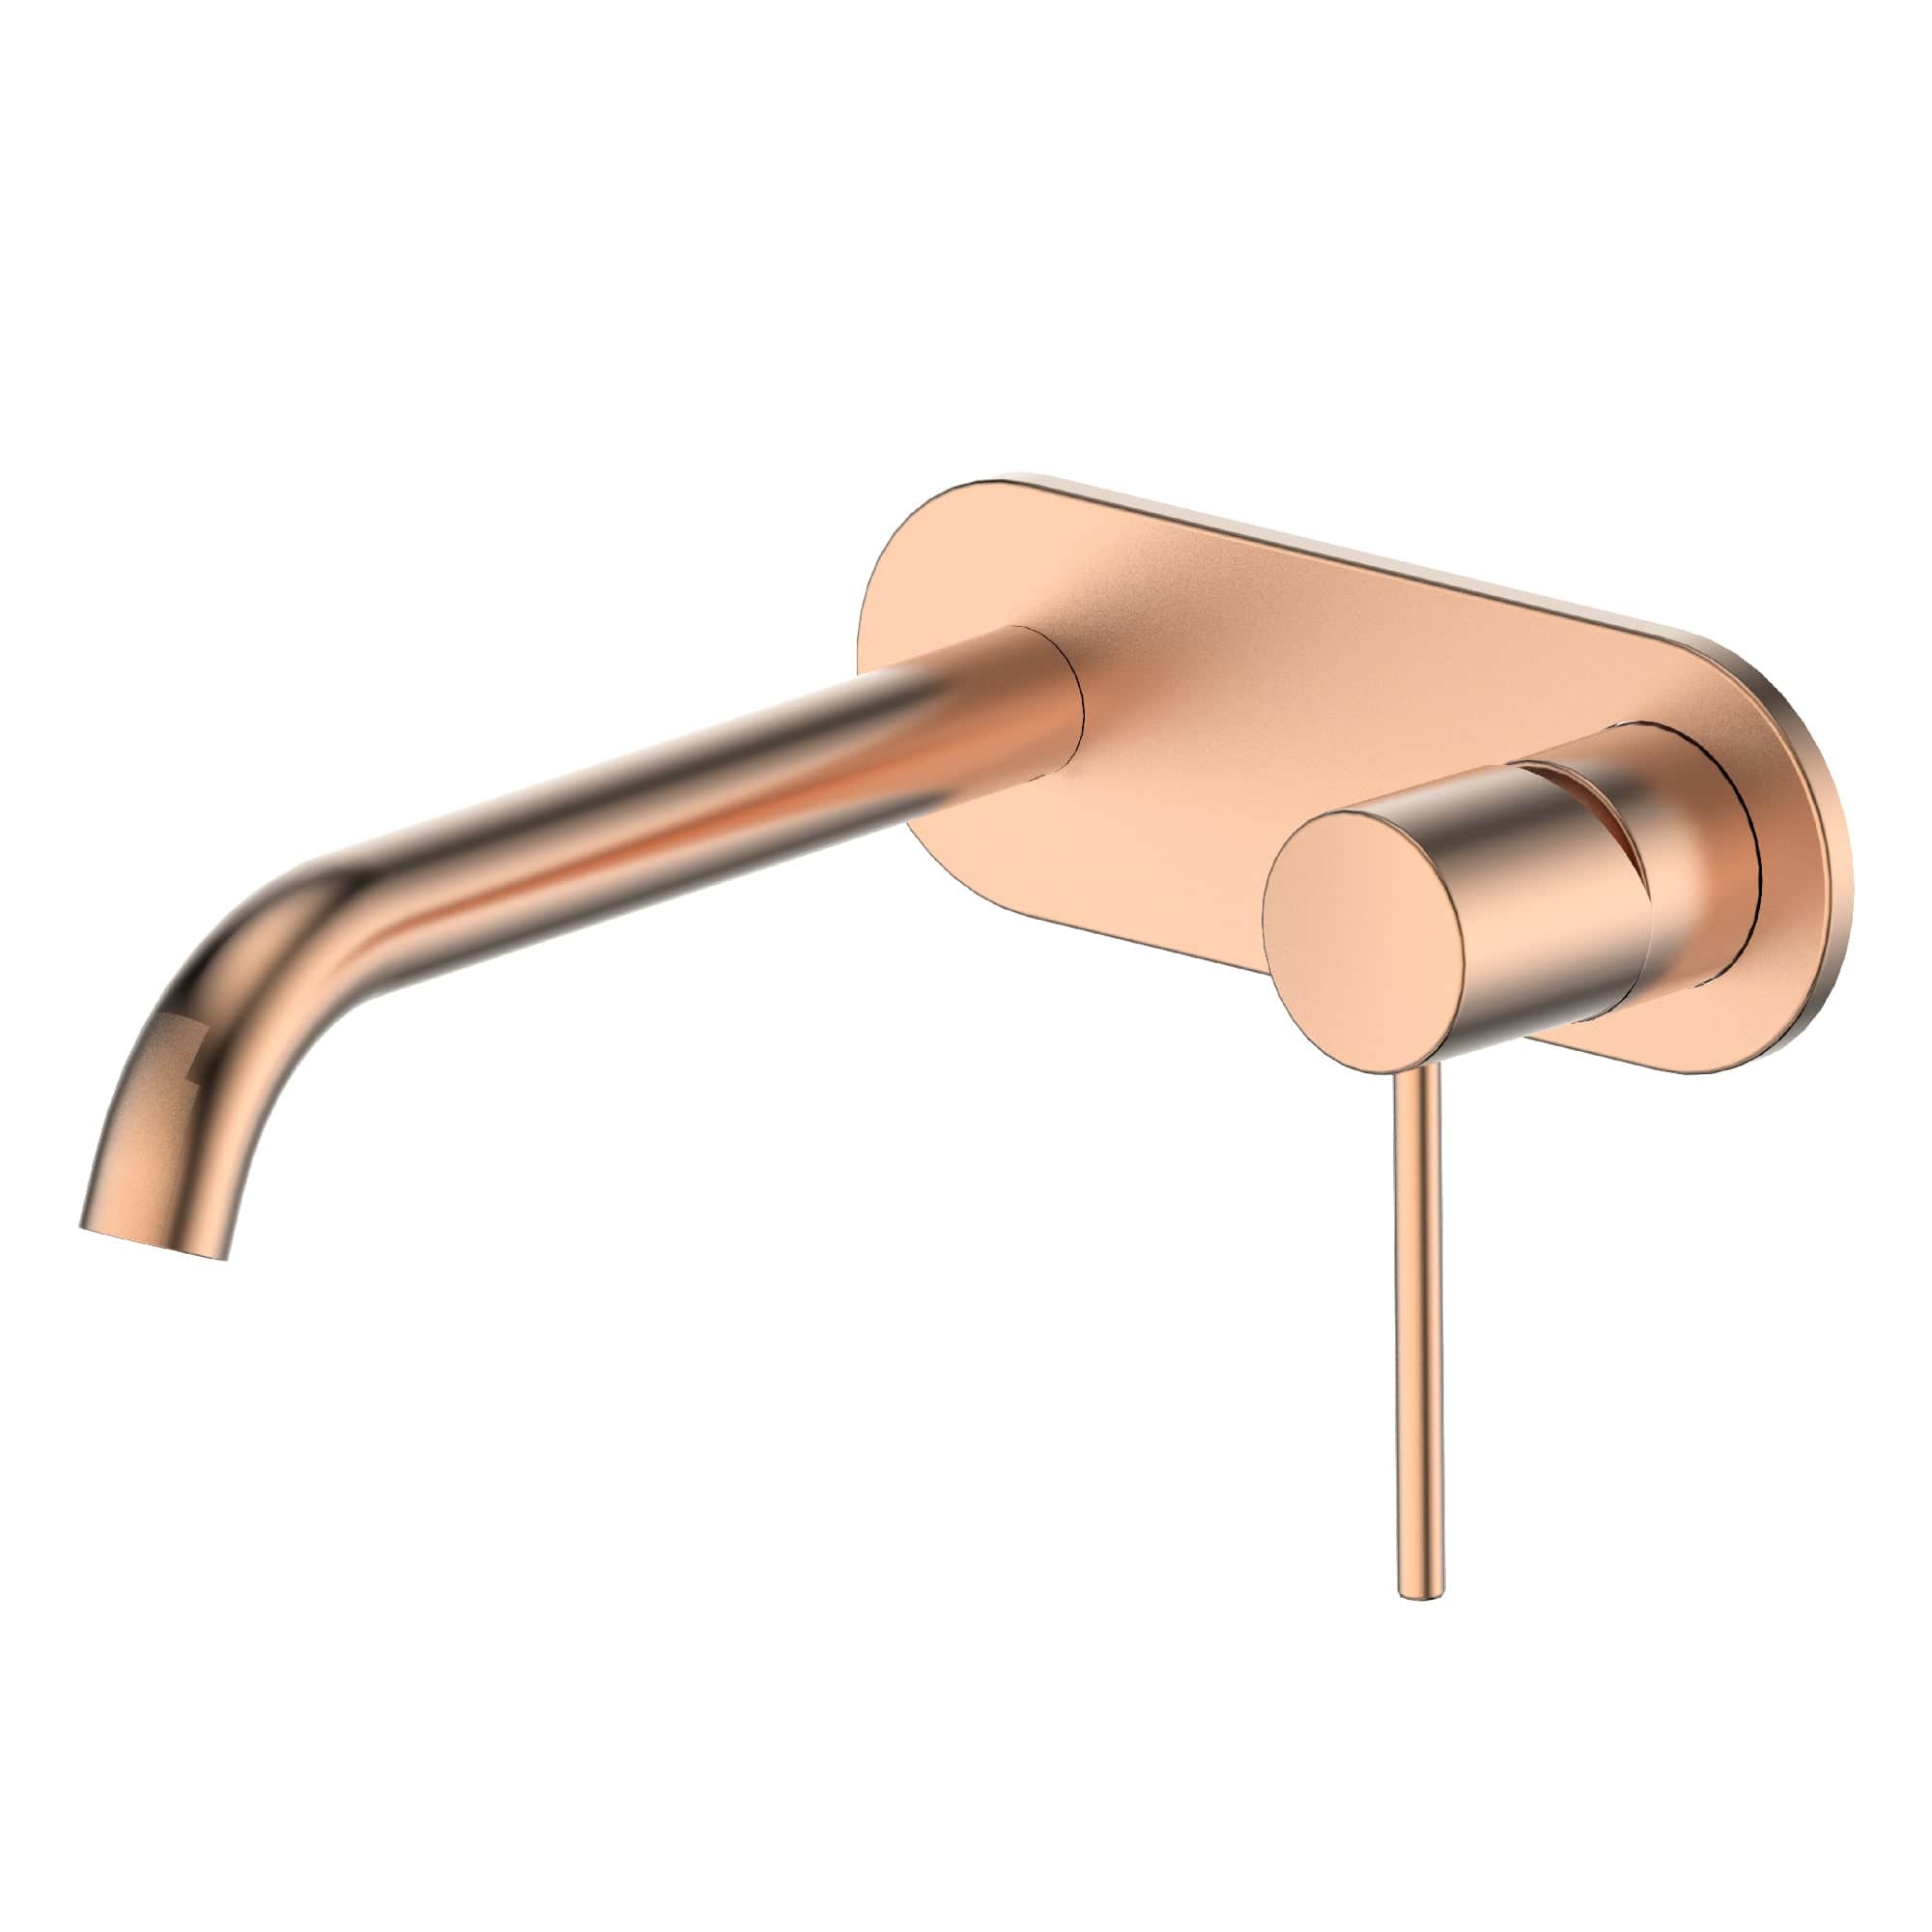 Greens Basin Tap Greens Gisele Wall Basin Mixer with Faceplate | Brushed Copper